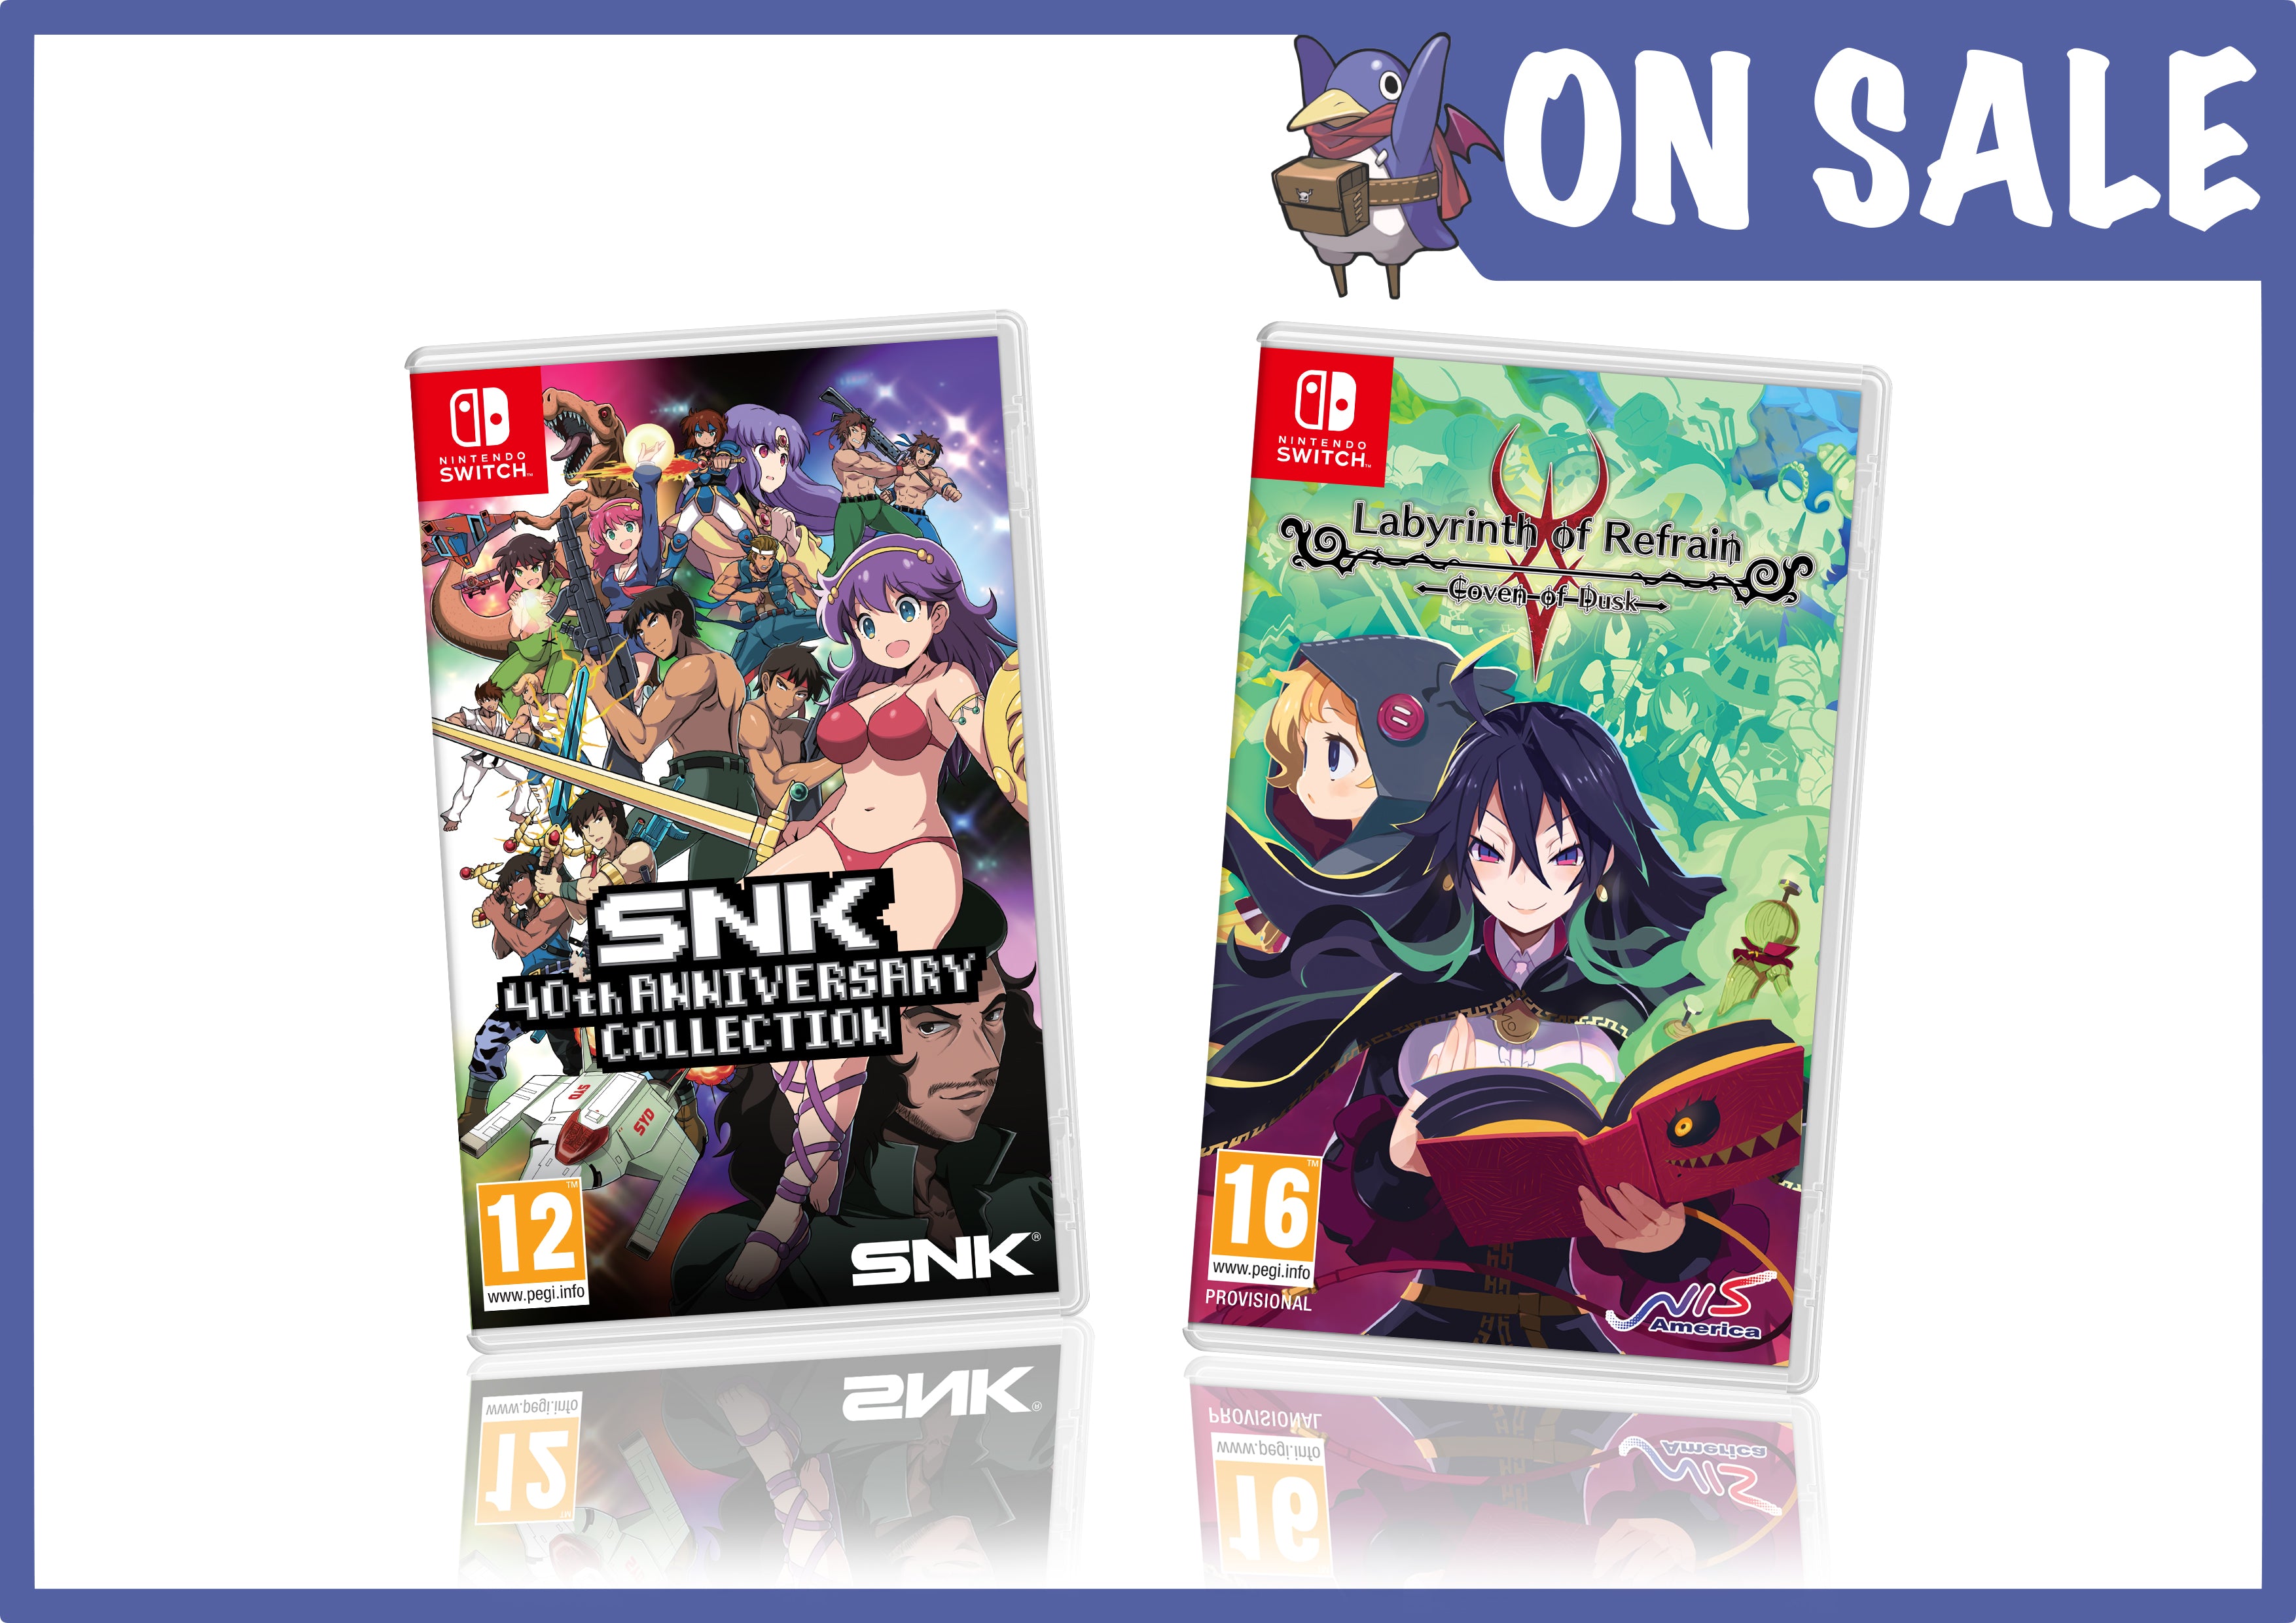 Deal of the Week - Labyrinth of Refrain: Coven of Dusk & SNK 40th Anniversary Collection!